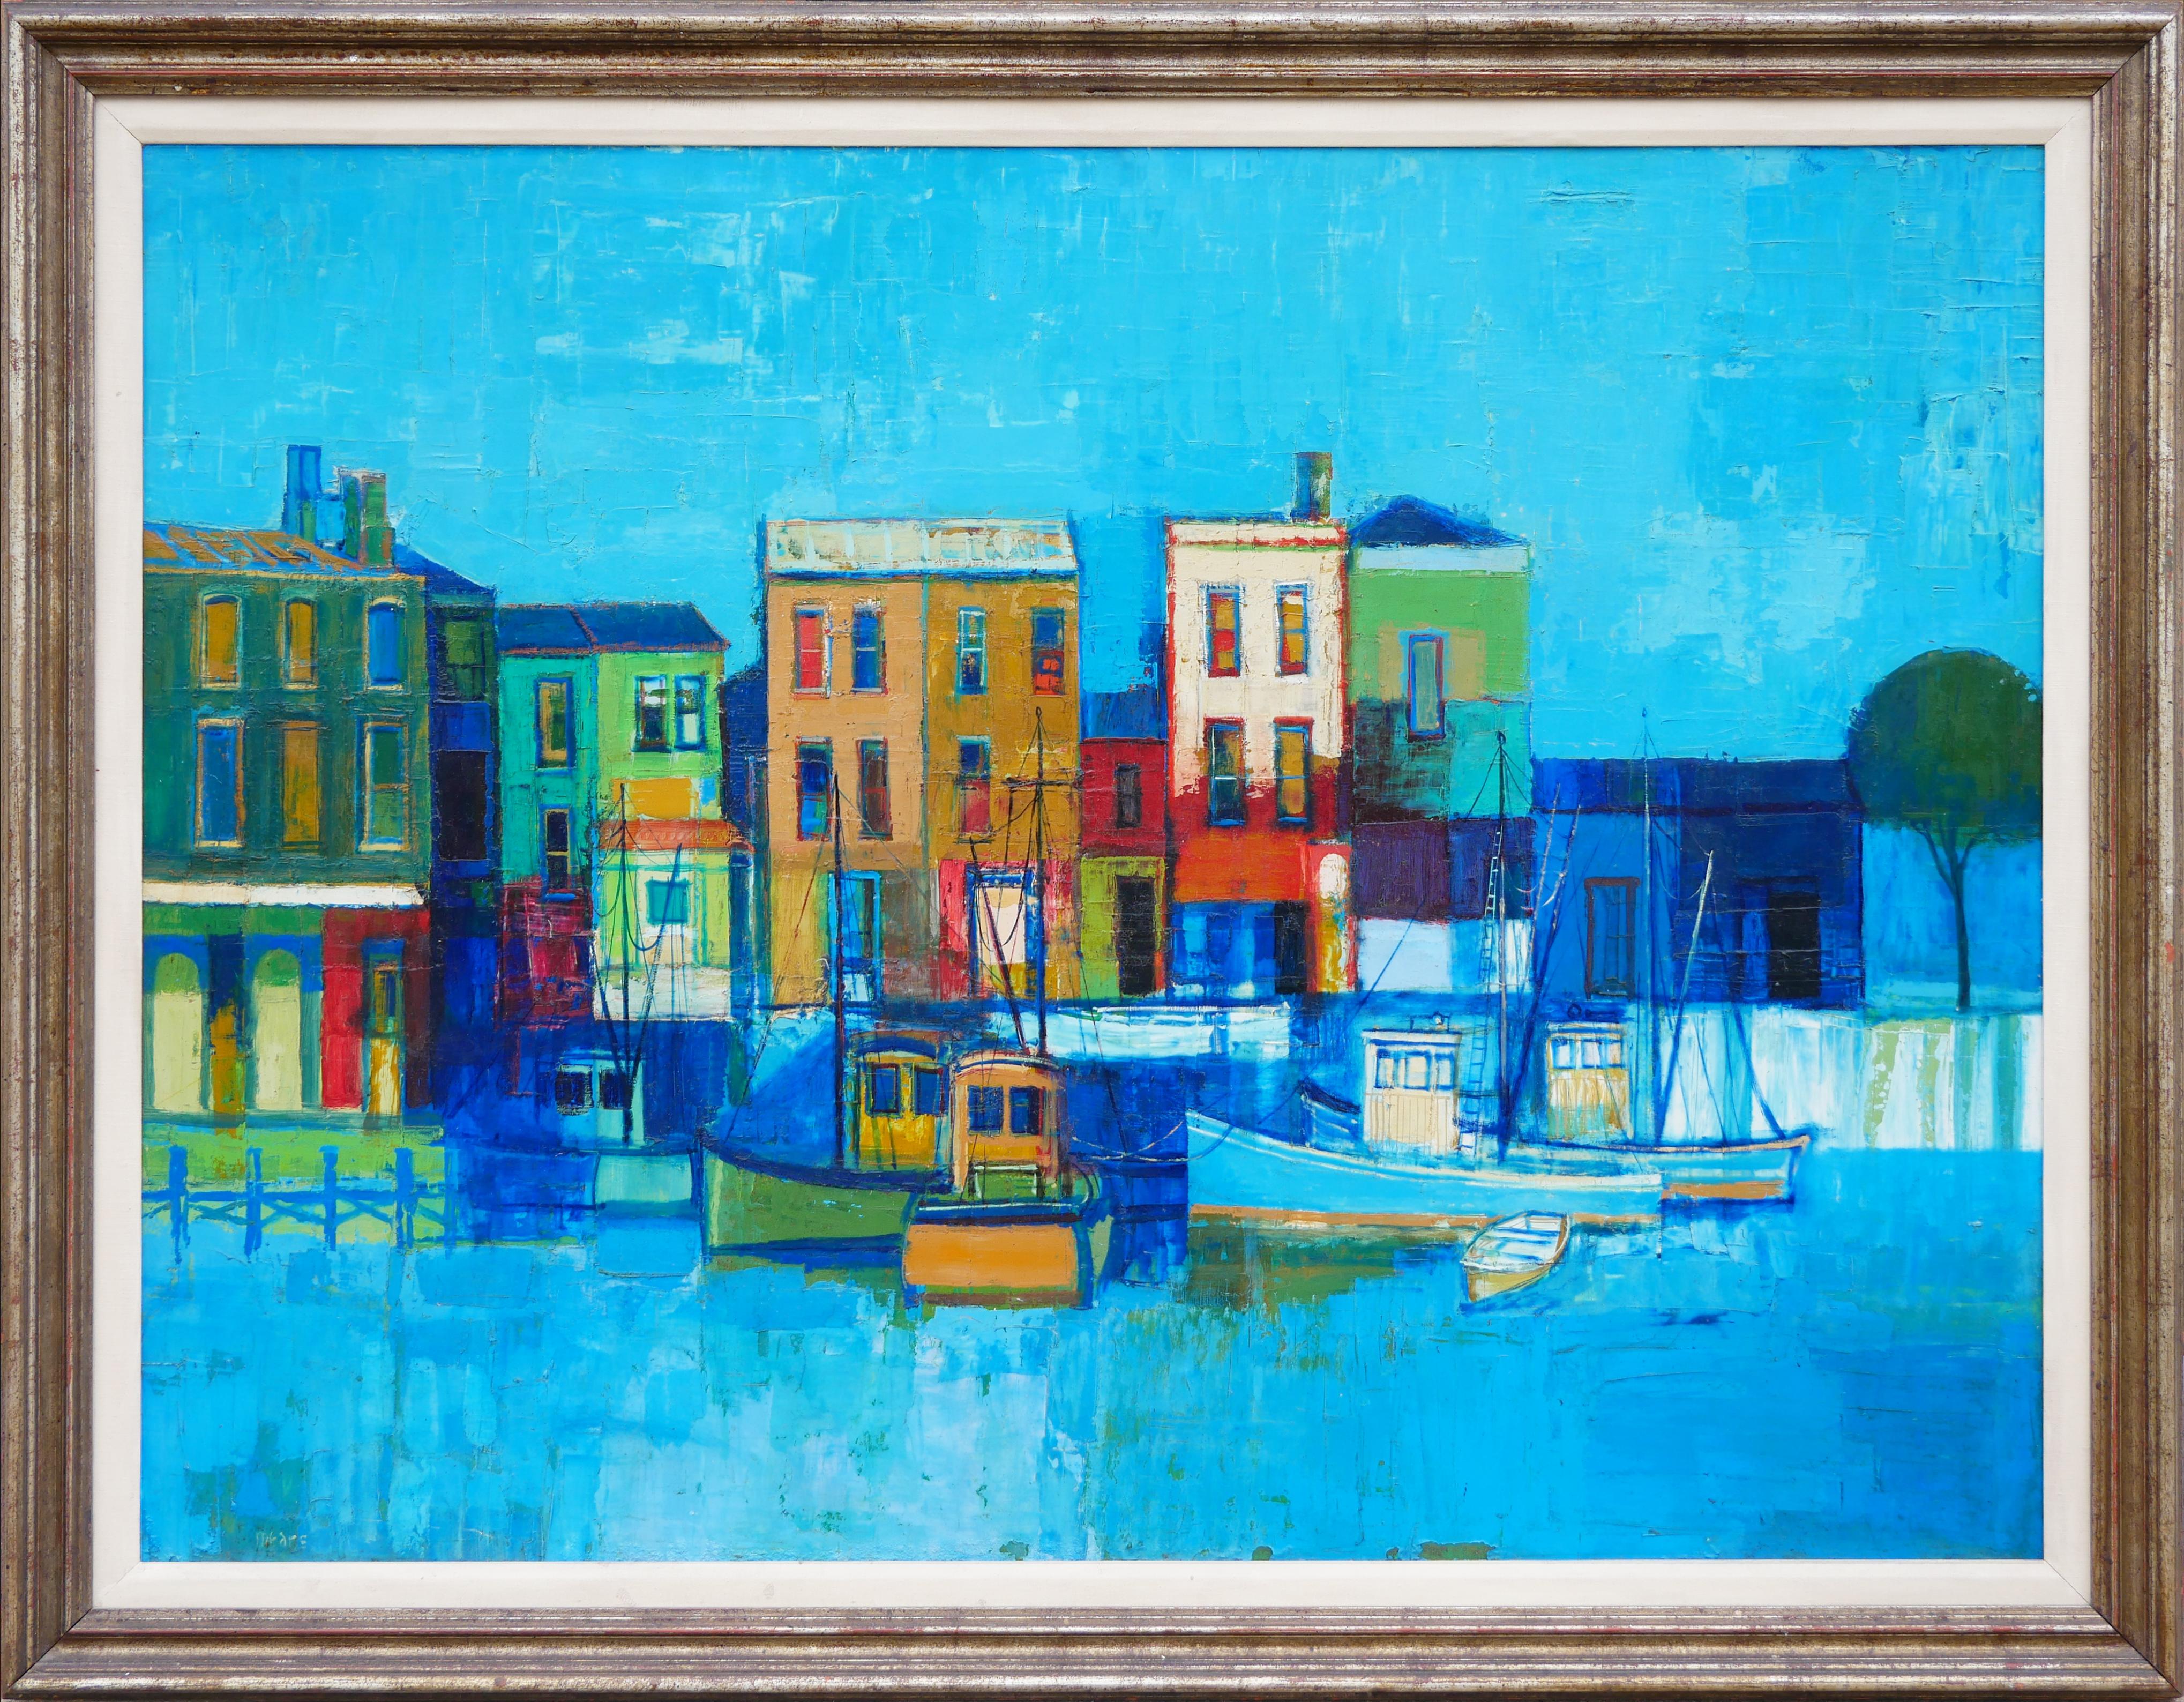 Herb Mears Abstract Painting - Modern Blue-Toned Abstract Coastal Cityscape Landscape with Boats at a Dock